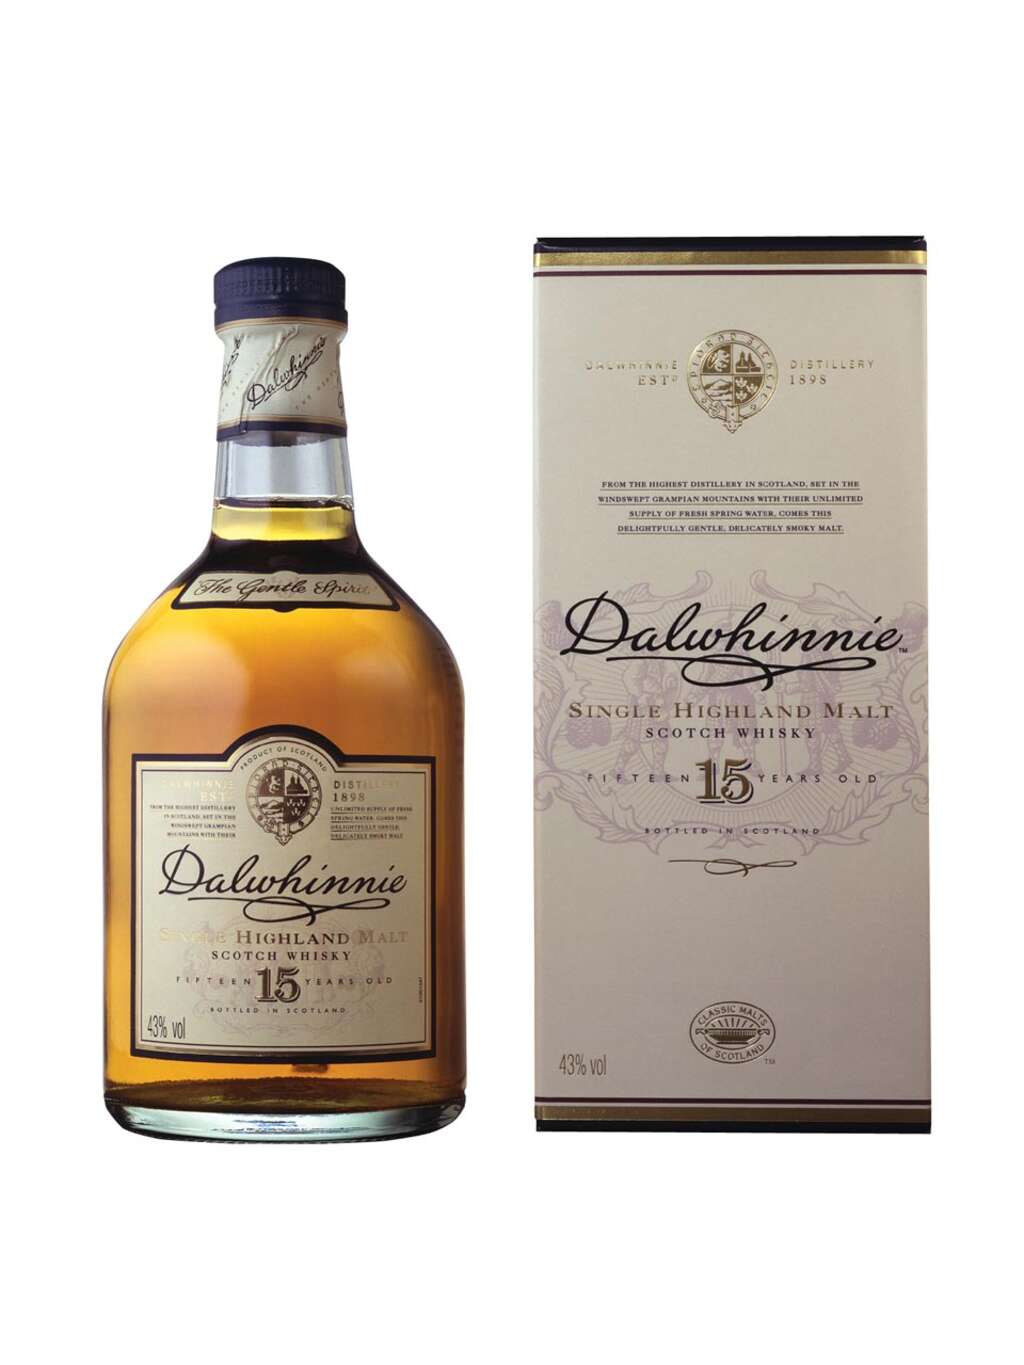 Dalwhinnie Single Highland and Malt Scotch Whisky 15 years old